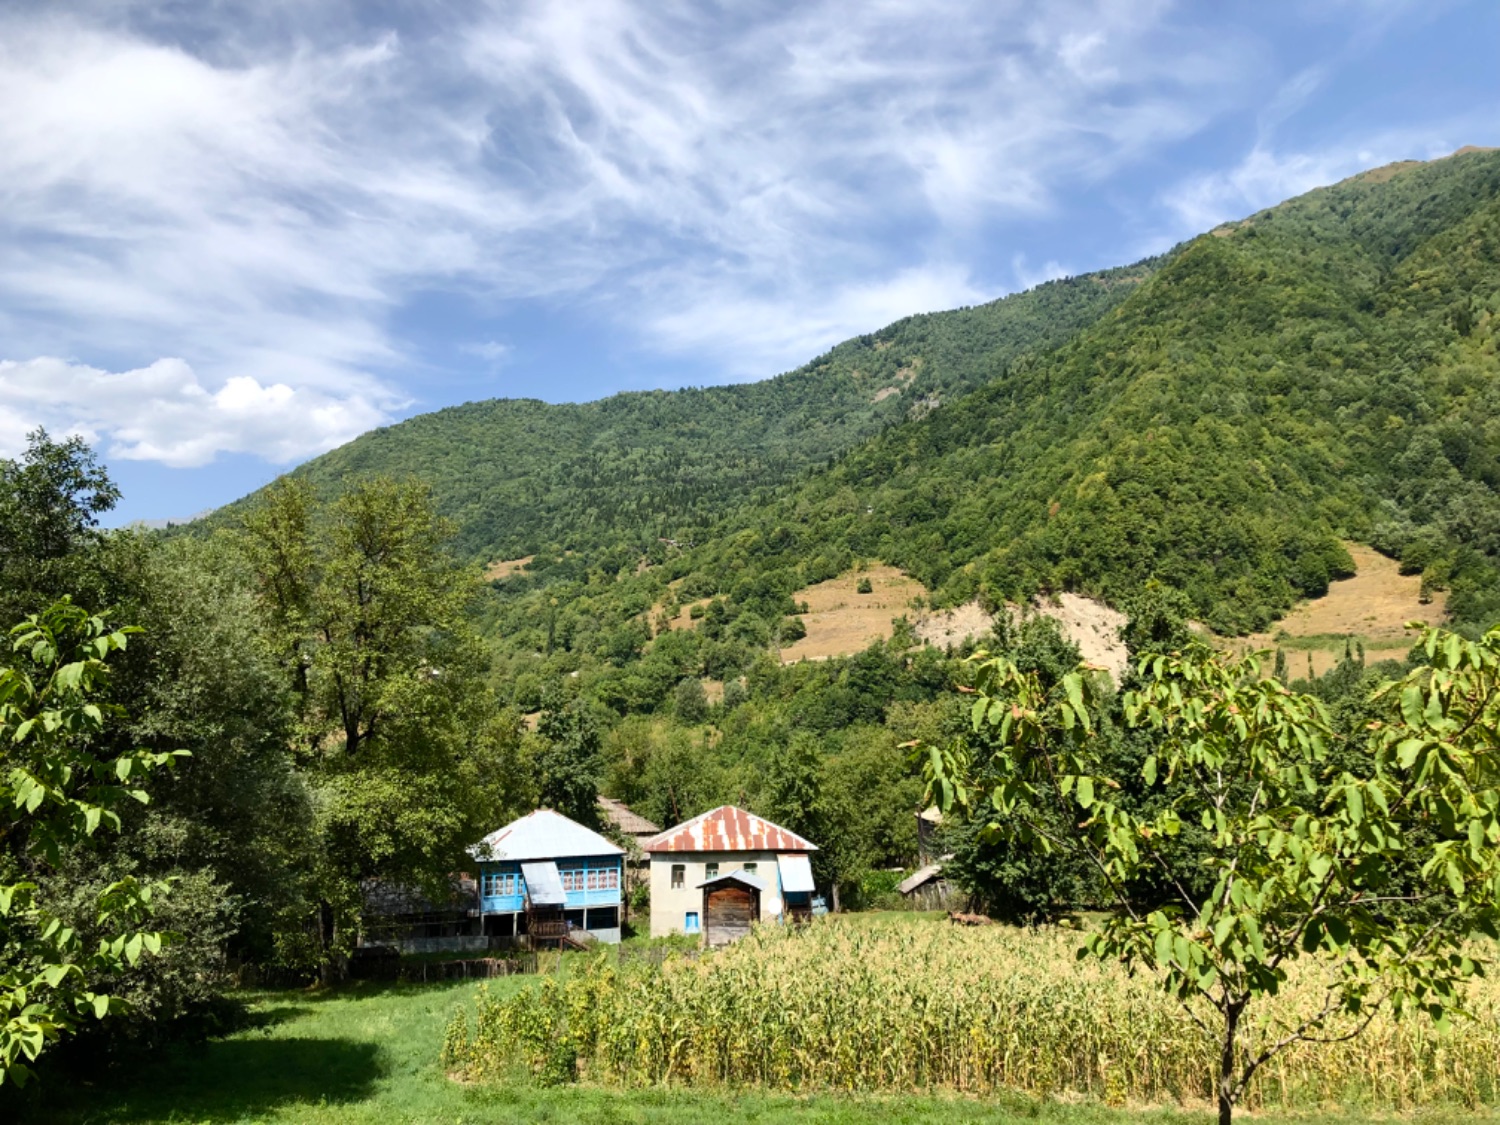 Typical view of houses in green valleys